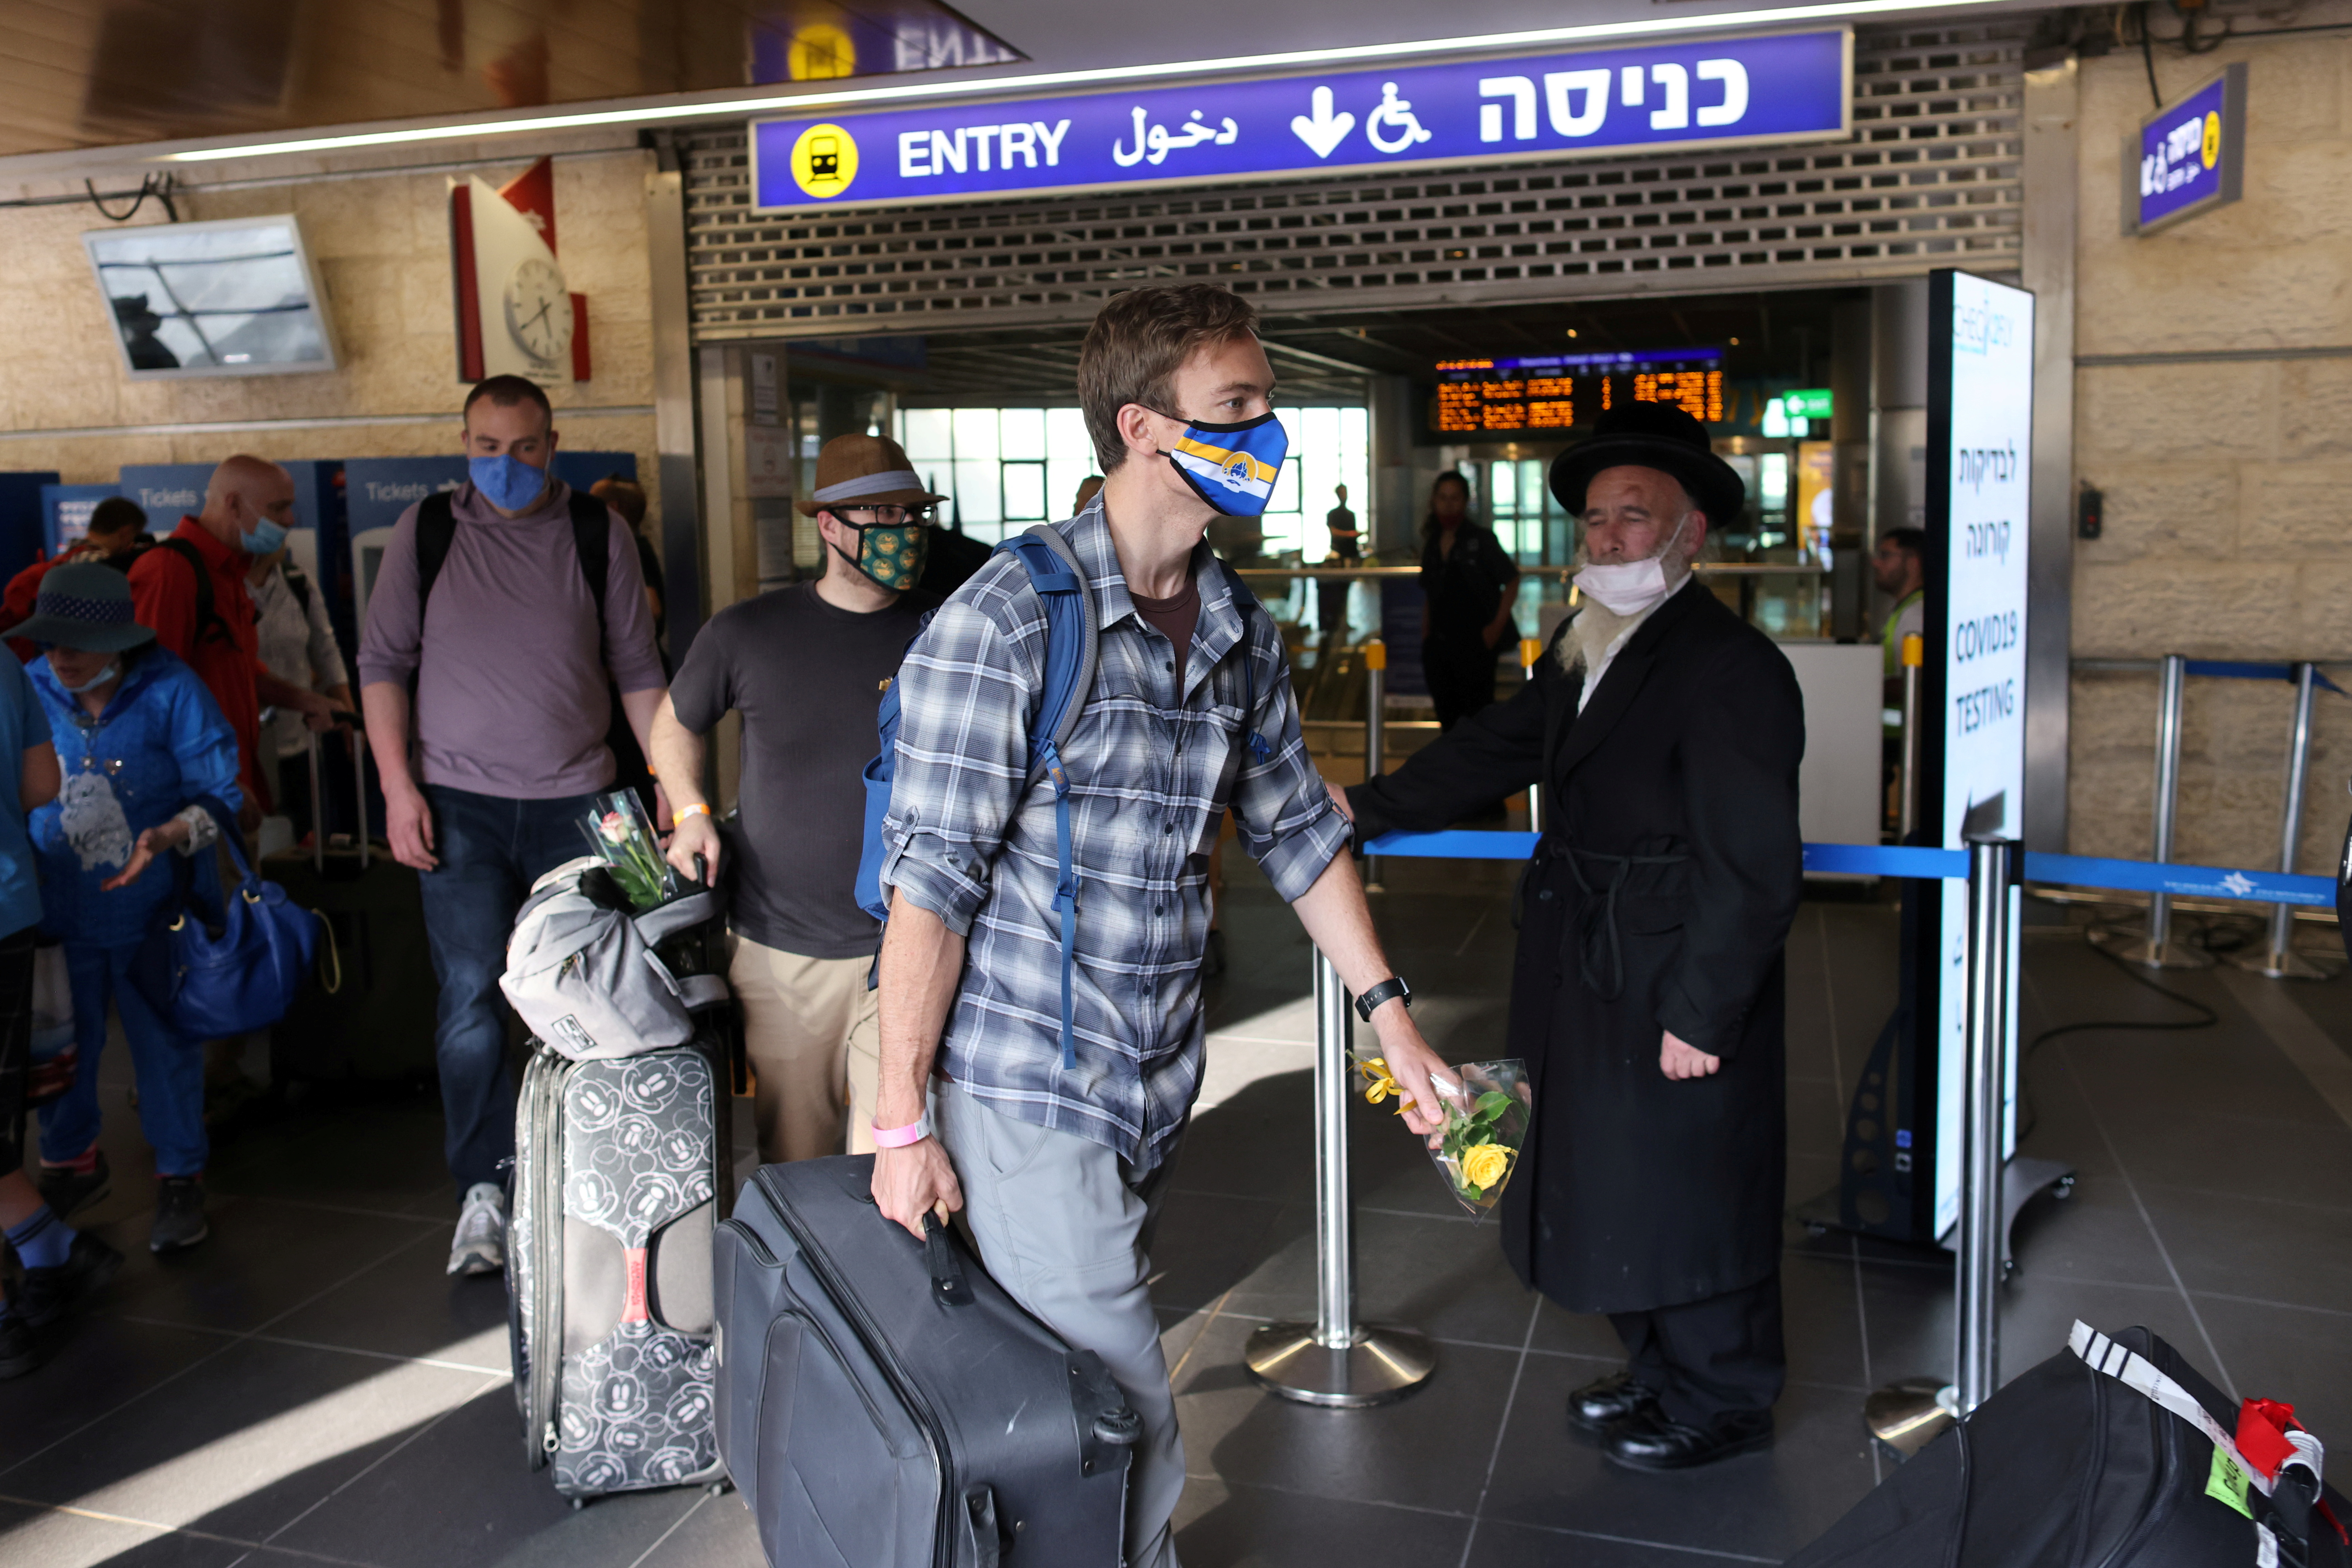 Israel reopens borders to small groups of tourists as COVID-19 restrictions ease